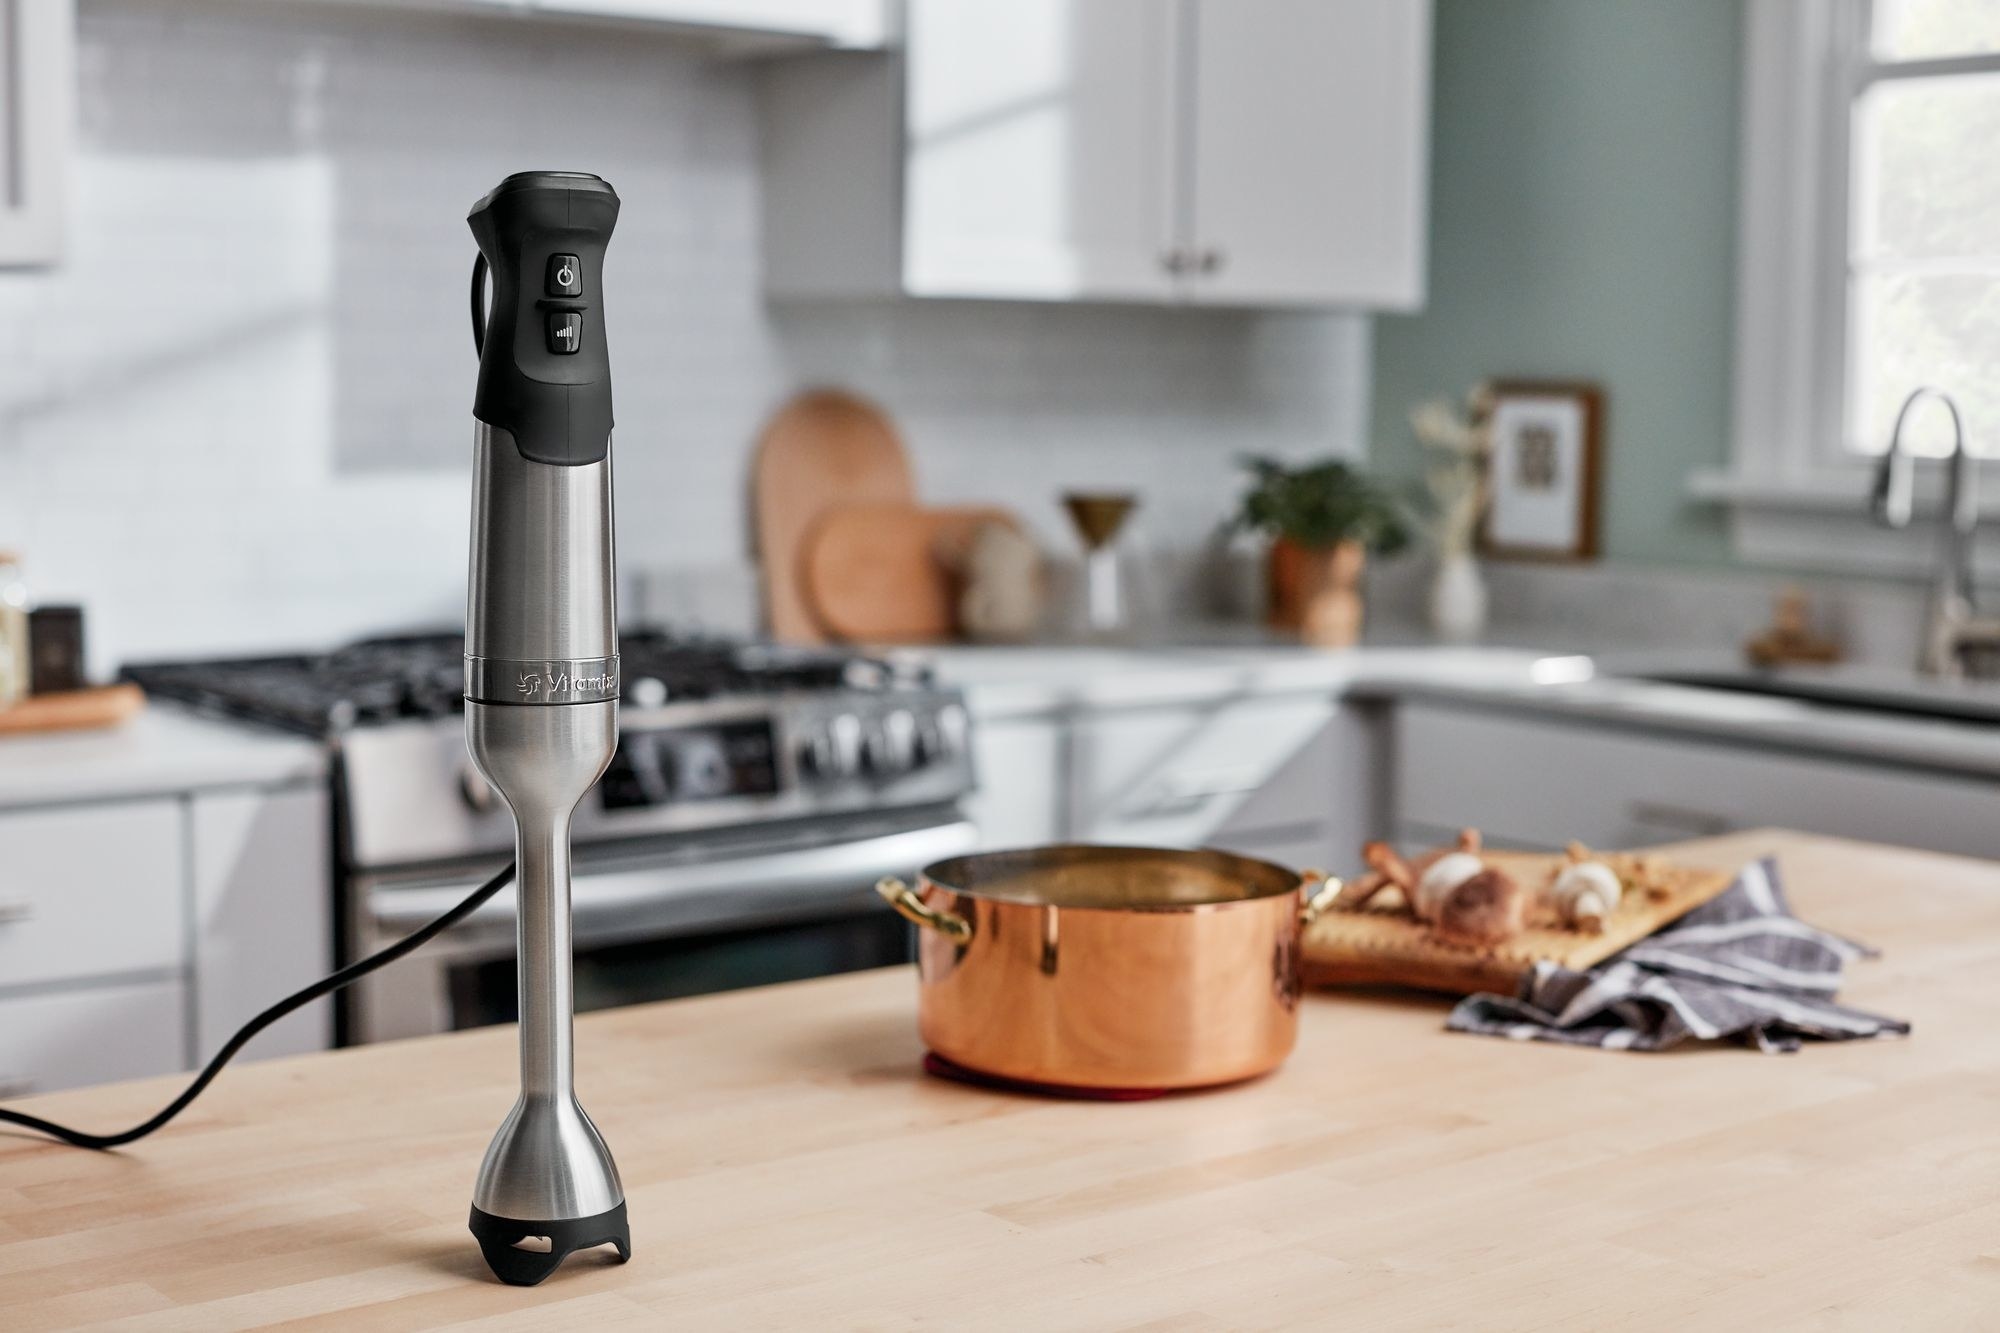 the immersion blender in a kitchen